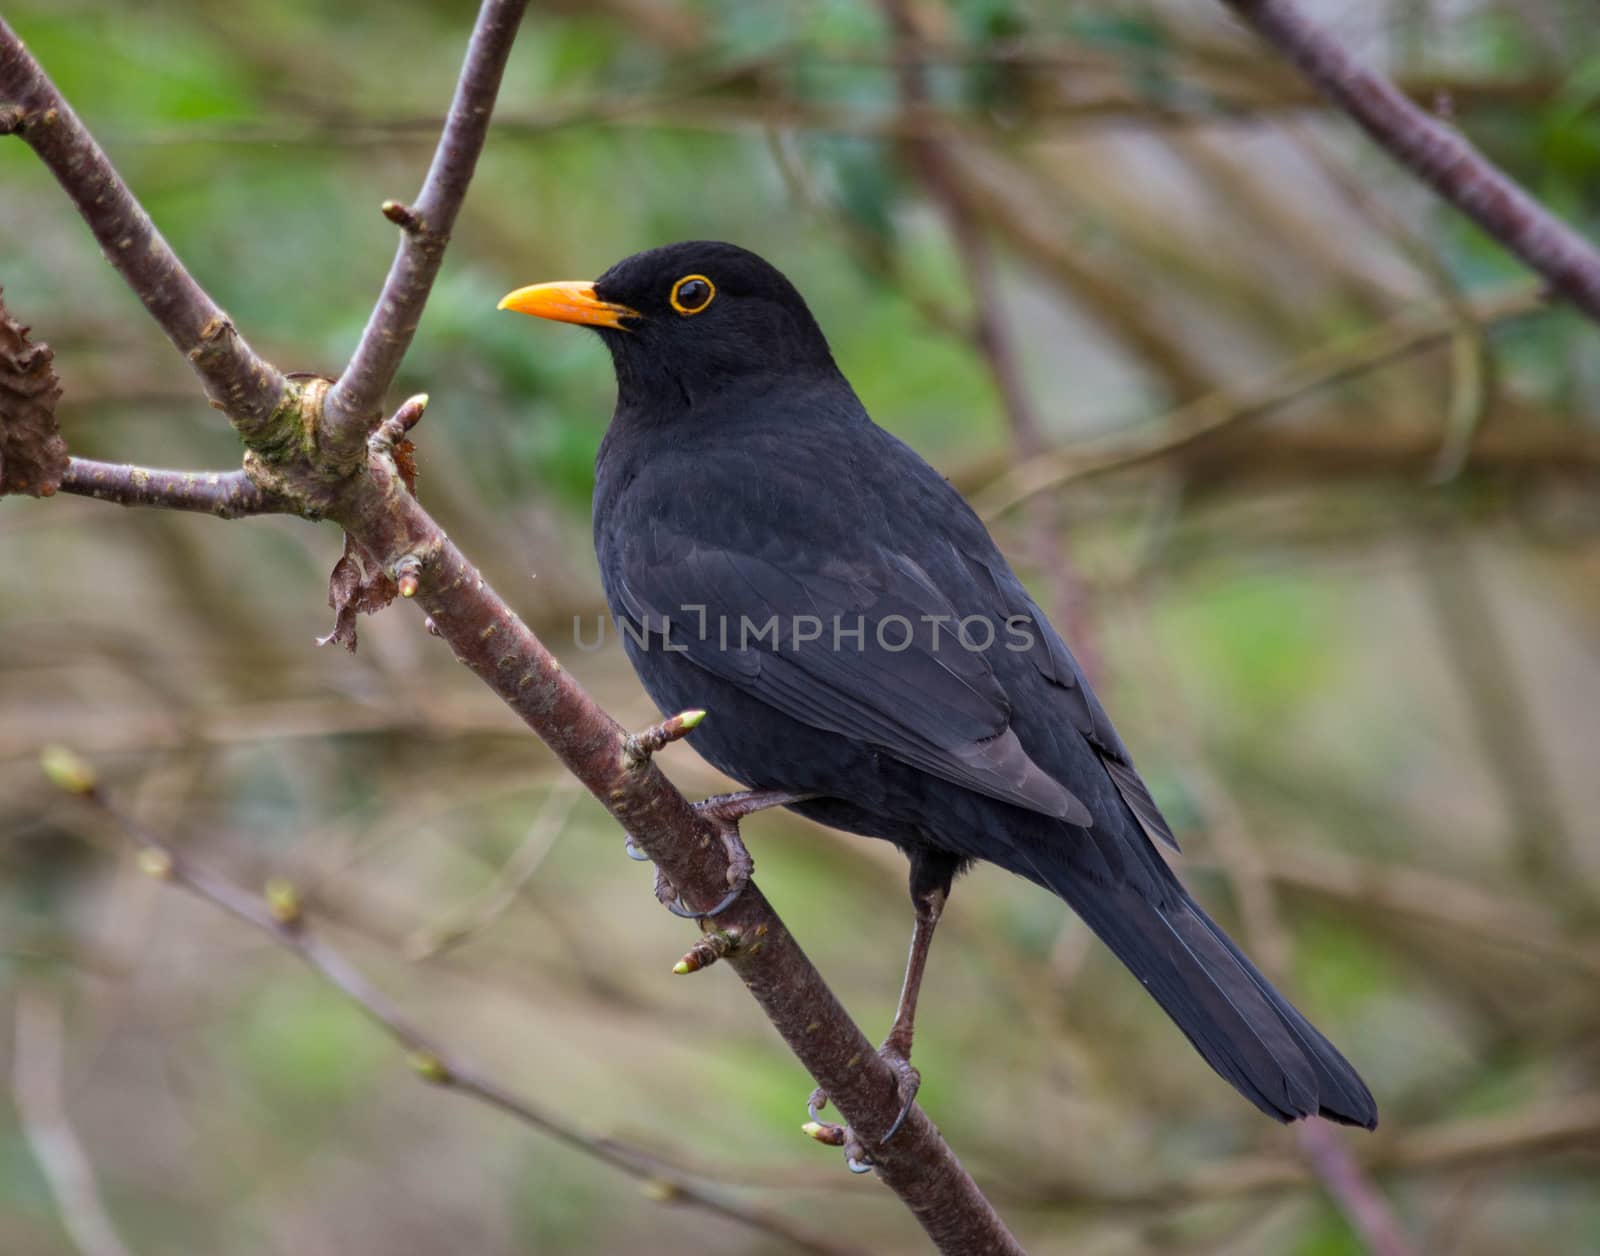 A blackbird with orange eye ring perched on a branch